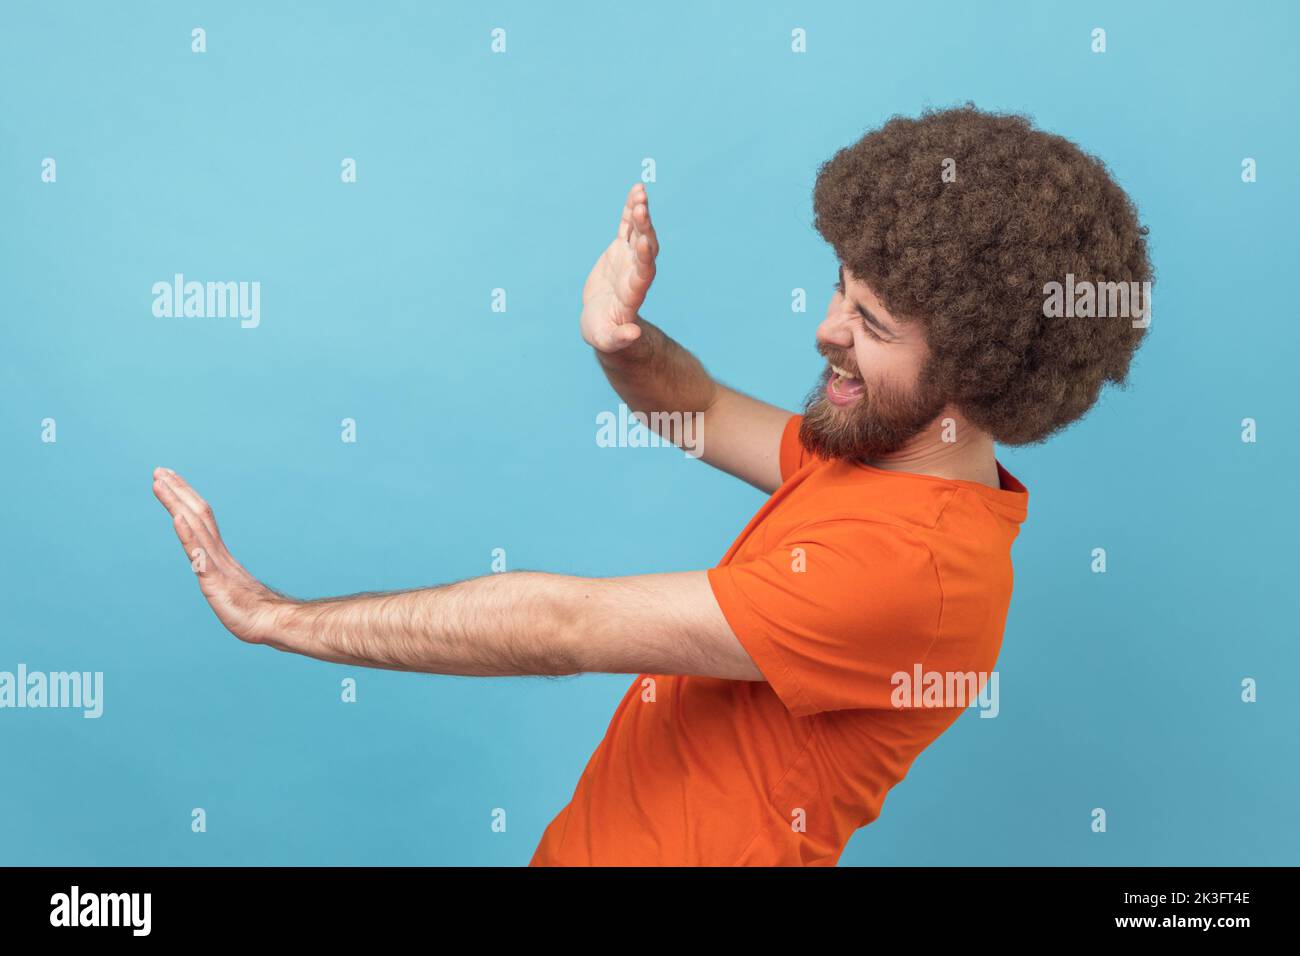 Side view of scared man with Afro hairstyle wearing orange T-shirt standing with afraid or worry face, looking ahead and blocking with his hands. Indoor studio shot isolated on blue background. Stock Photo